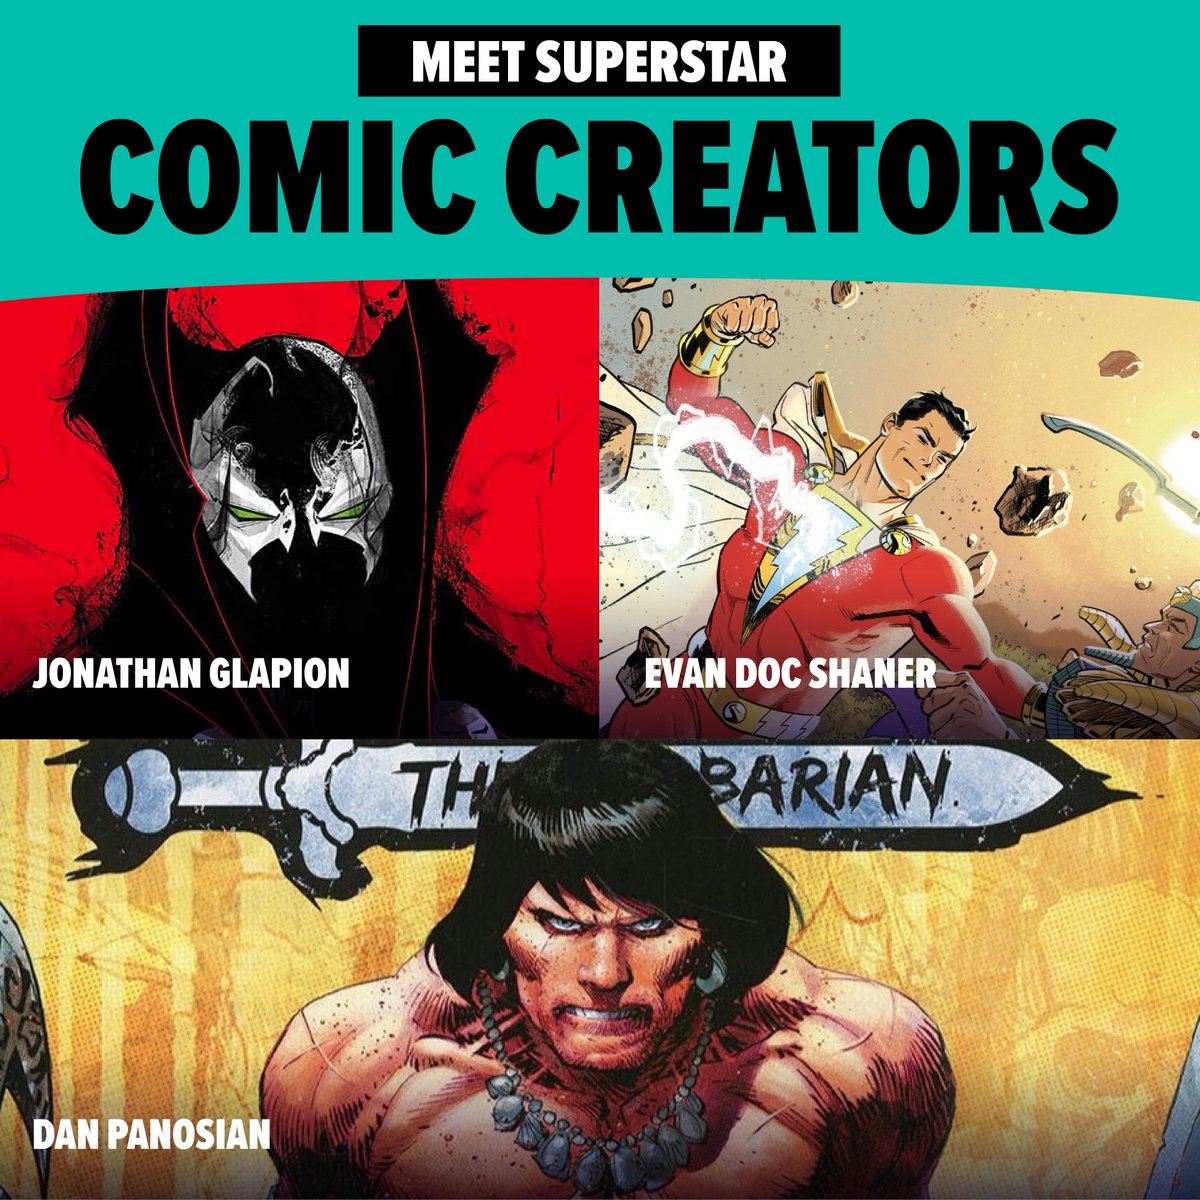 Comic fans, get ready to meet your favorite comic creators, take part in comic events, and pick up some highly collectible exclusive comics at the show. Grab your tickets today. spr.ly/6017R9slV